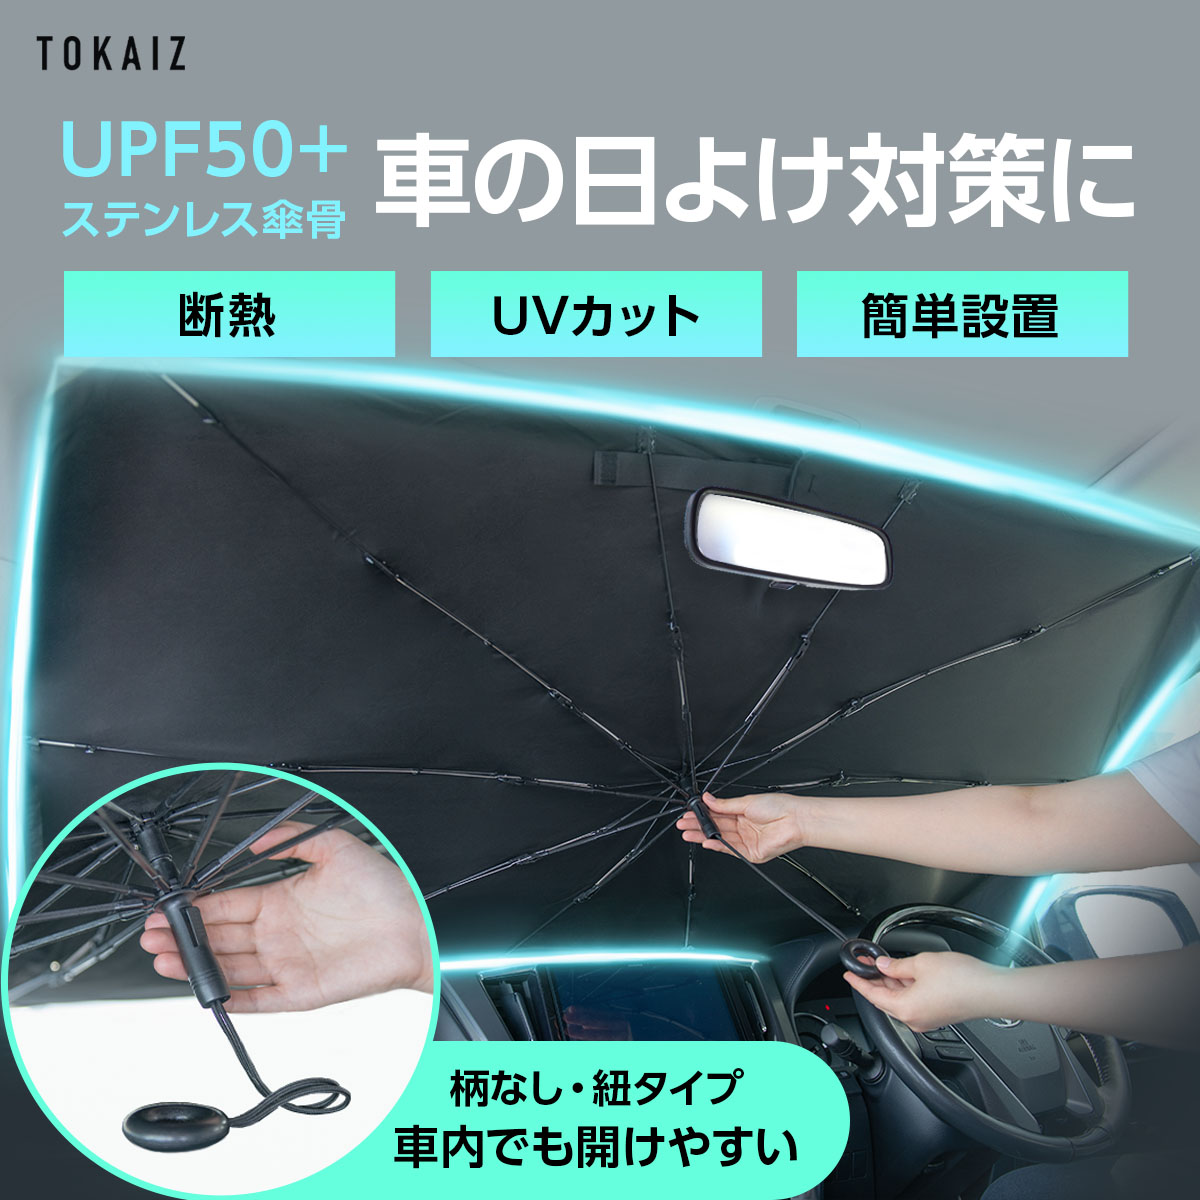  sun shade car umbrella type umbrella car stylish umbrella type front insulation attached outside front glass large light car front sun shade Lexus correspondence Father's day TOKAIZ